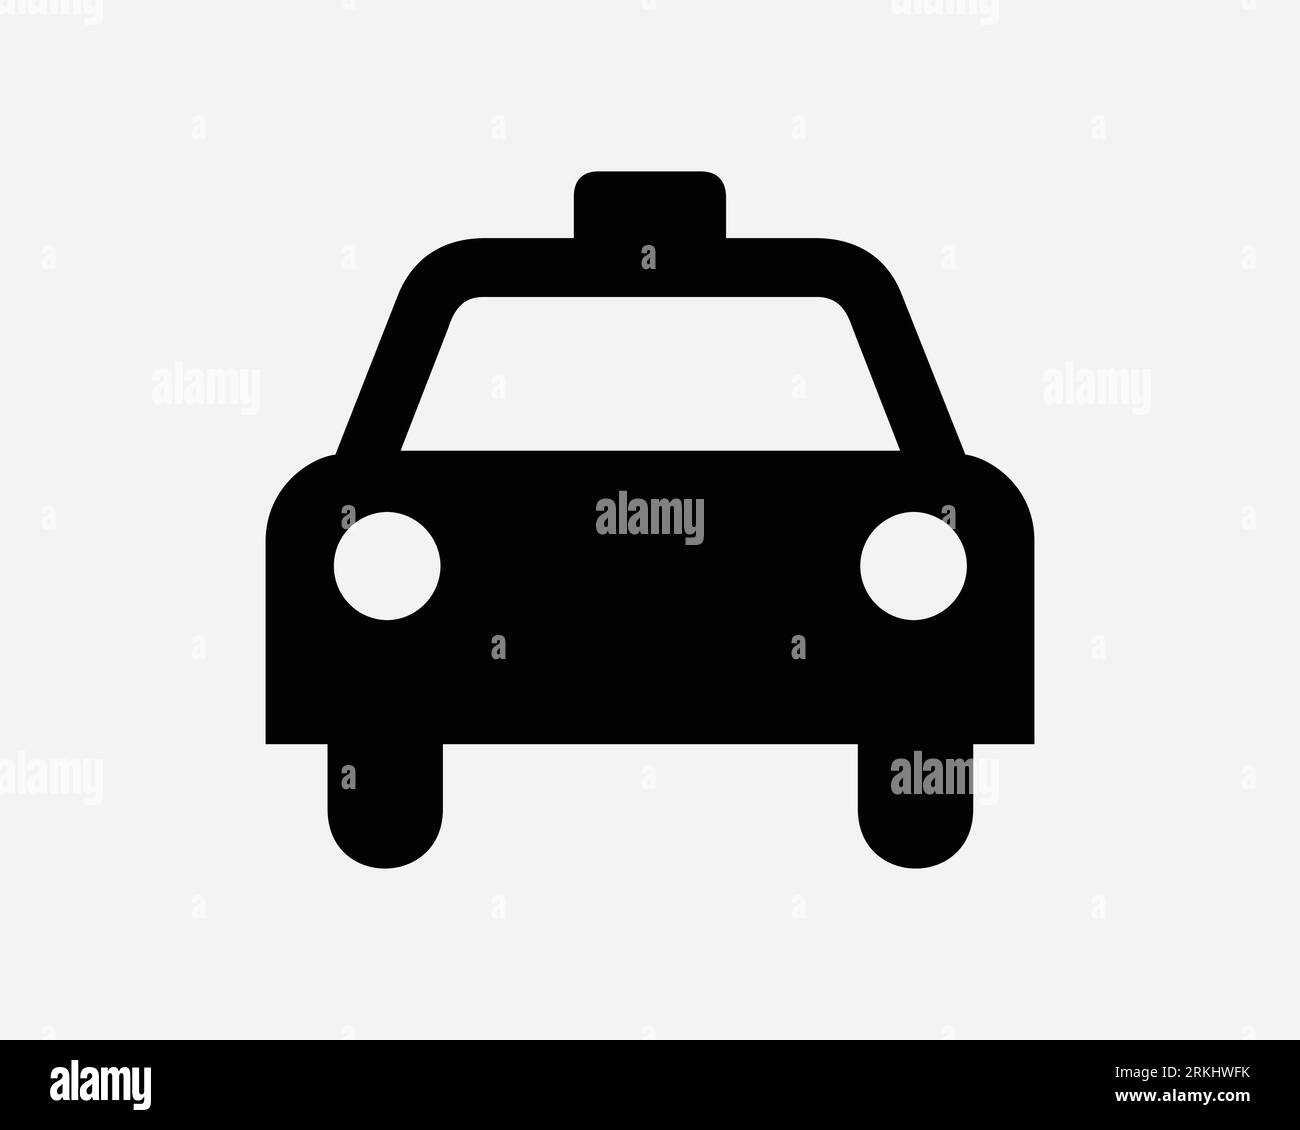 Taxi Icon Cab Car Passenger Public Transport Road Transportation Travel Trip Frontal Front View Approach Black Silhouette Shape Vector Sign Symbol Stock Vector